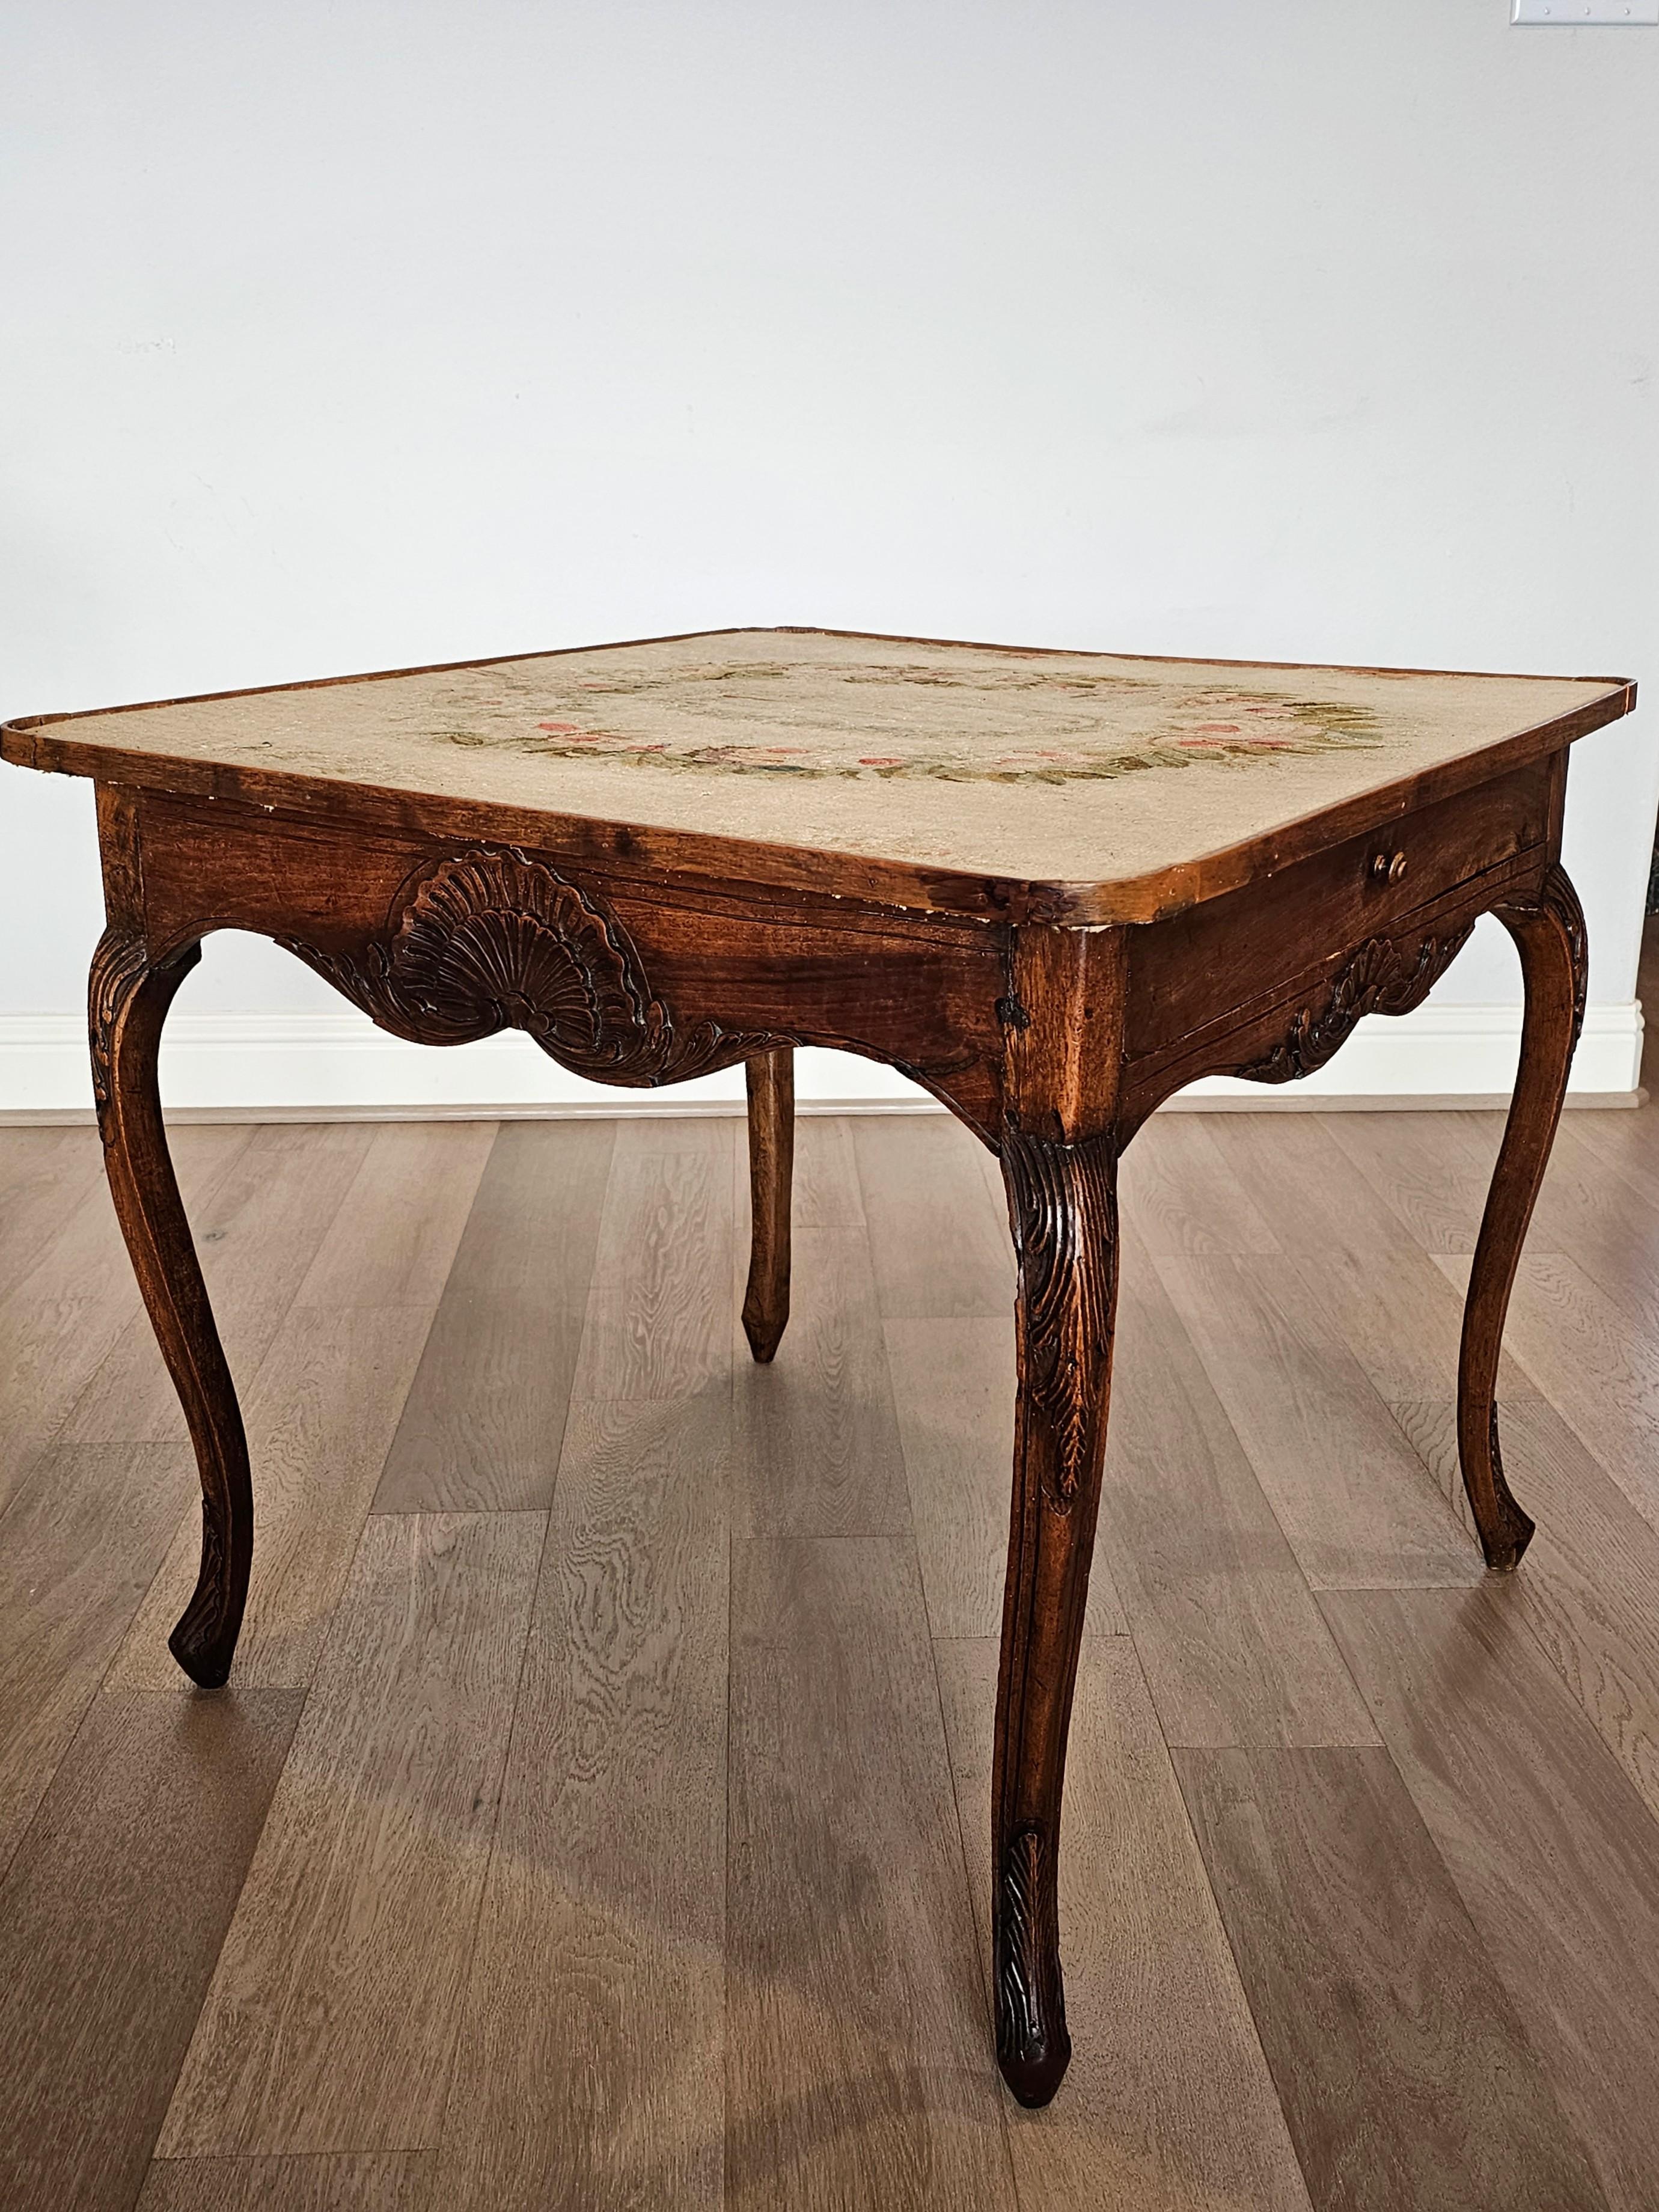 An elegant antique Louis XV style carved walnut card game table. circa 1790

Born in Continental Europe in the late 18th / early 19th century, exquisitely hand-crafted in sophisticated French Louis 15th taste, featuring a rectangular shaped top with